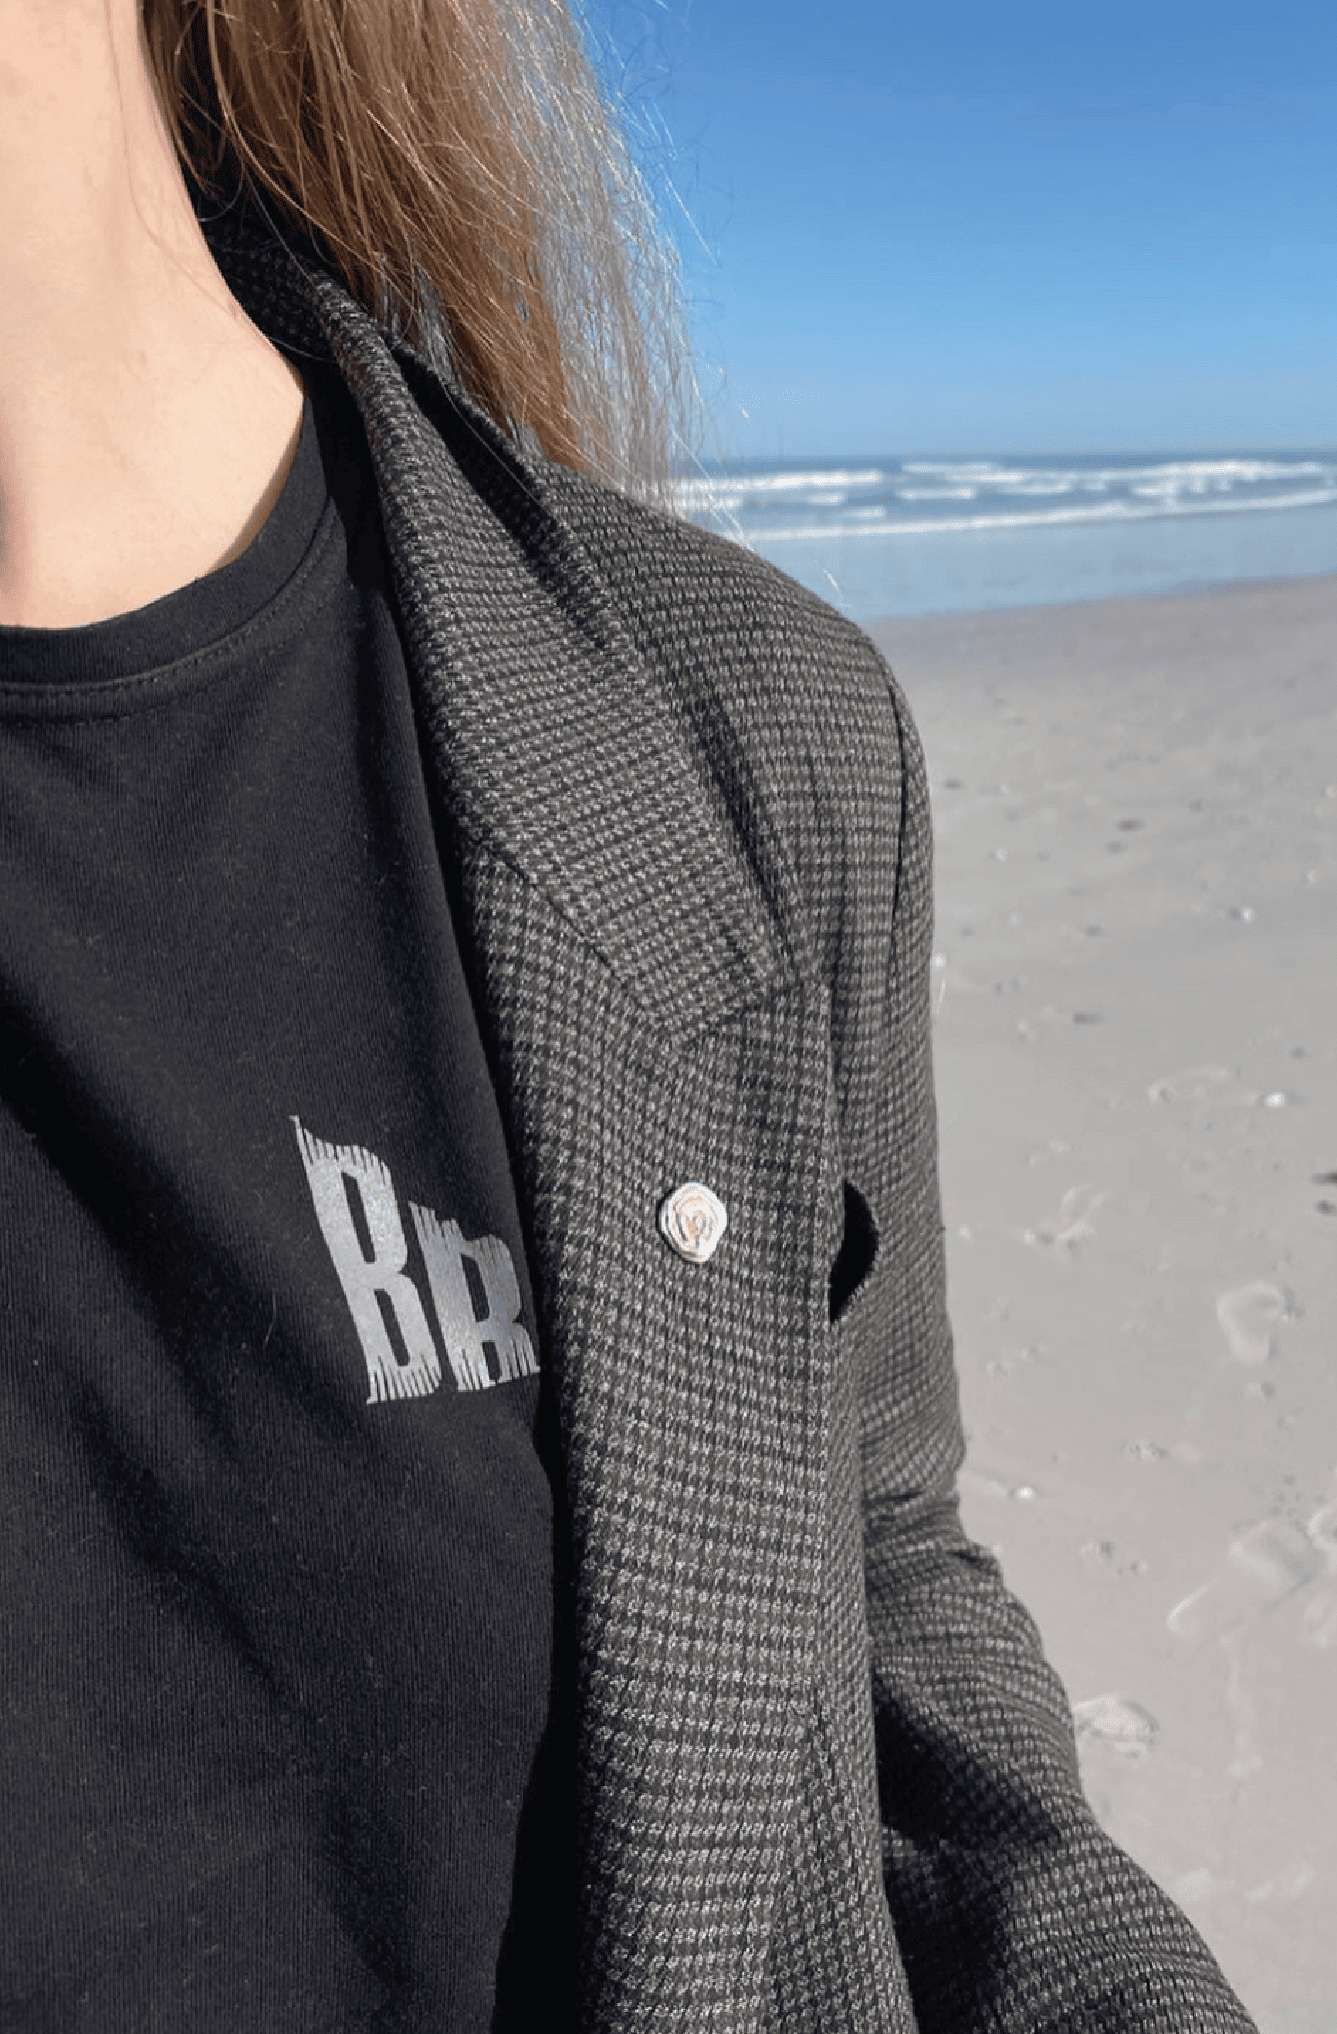 Woman on beach wearing a black t-shirt styled with tailored jacket and silver pin